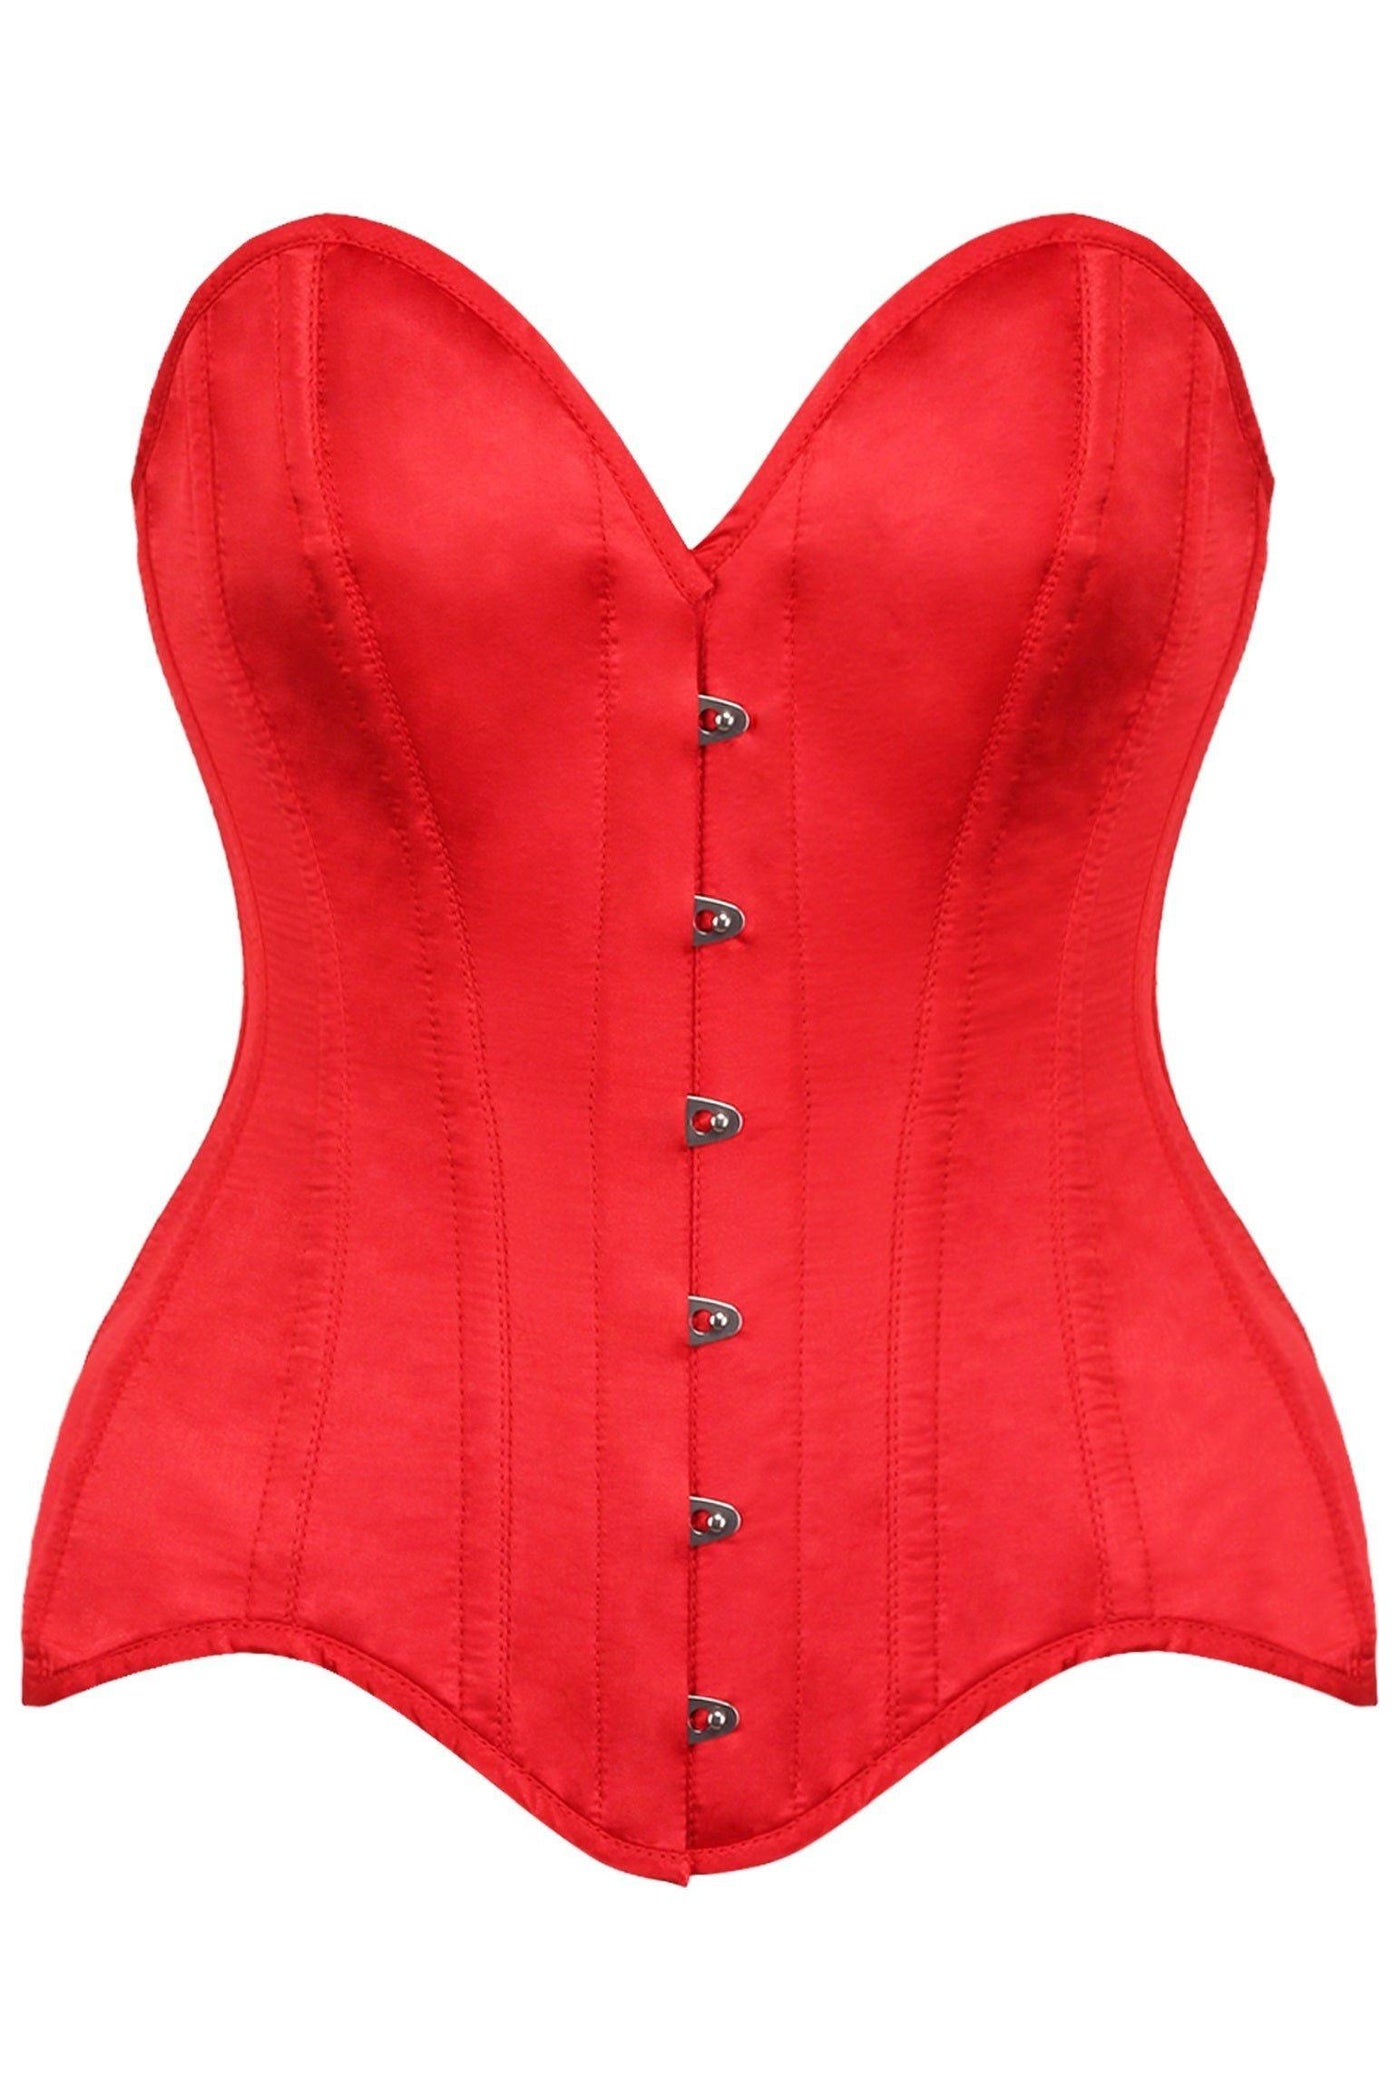 Top Drawer Red Satin Steel Boned Overbust Corset - AMIClubwear